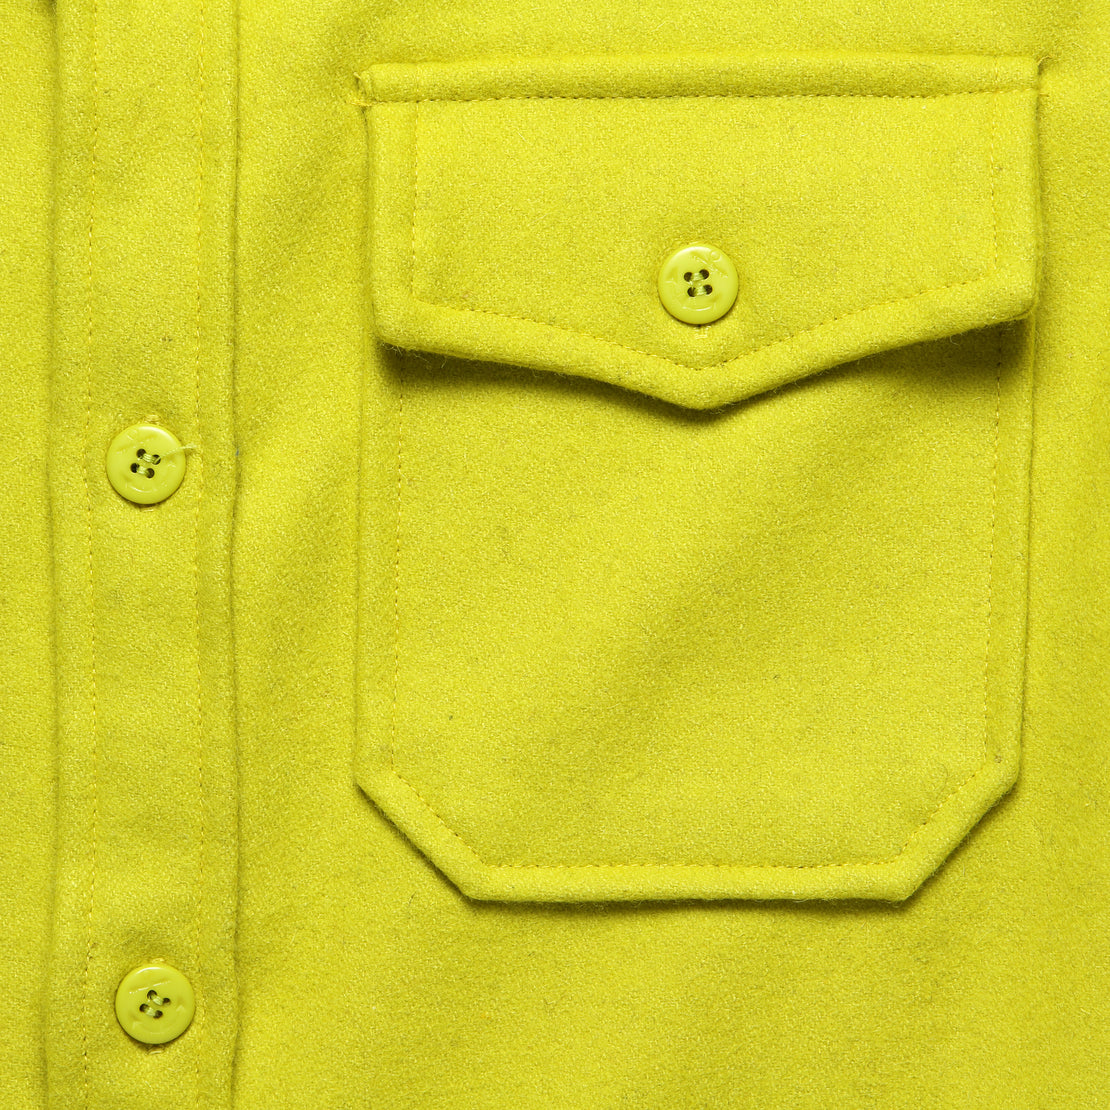 CPO Wool Shirt - Neon Yellow - Schott - STAG Provisions - Tops - L/S Woven - Overshirt